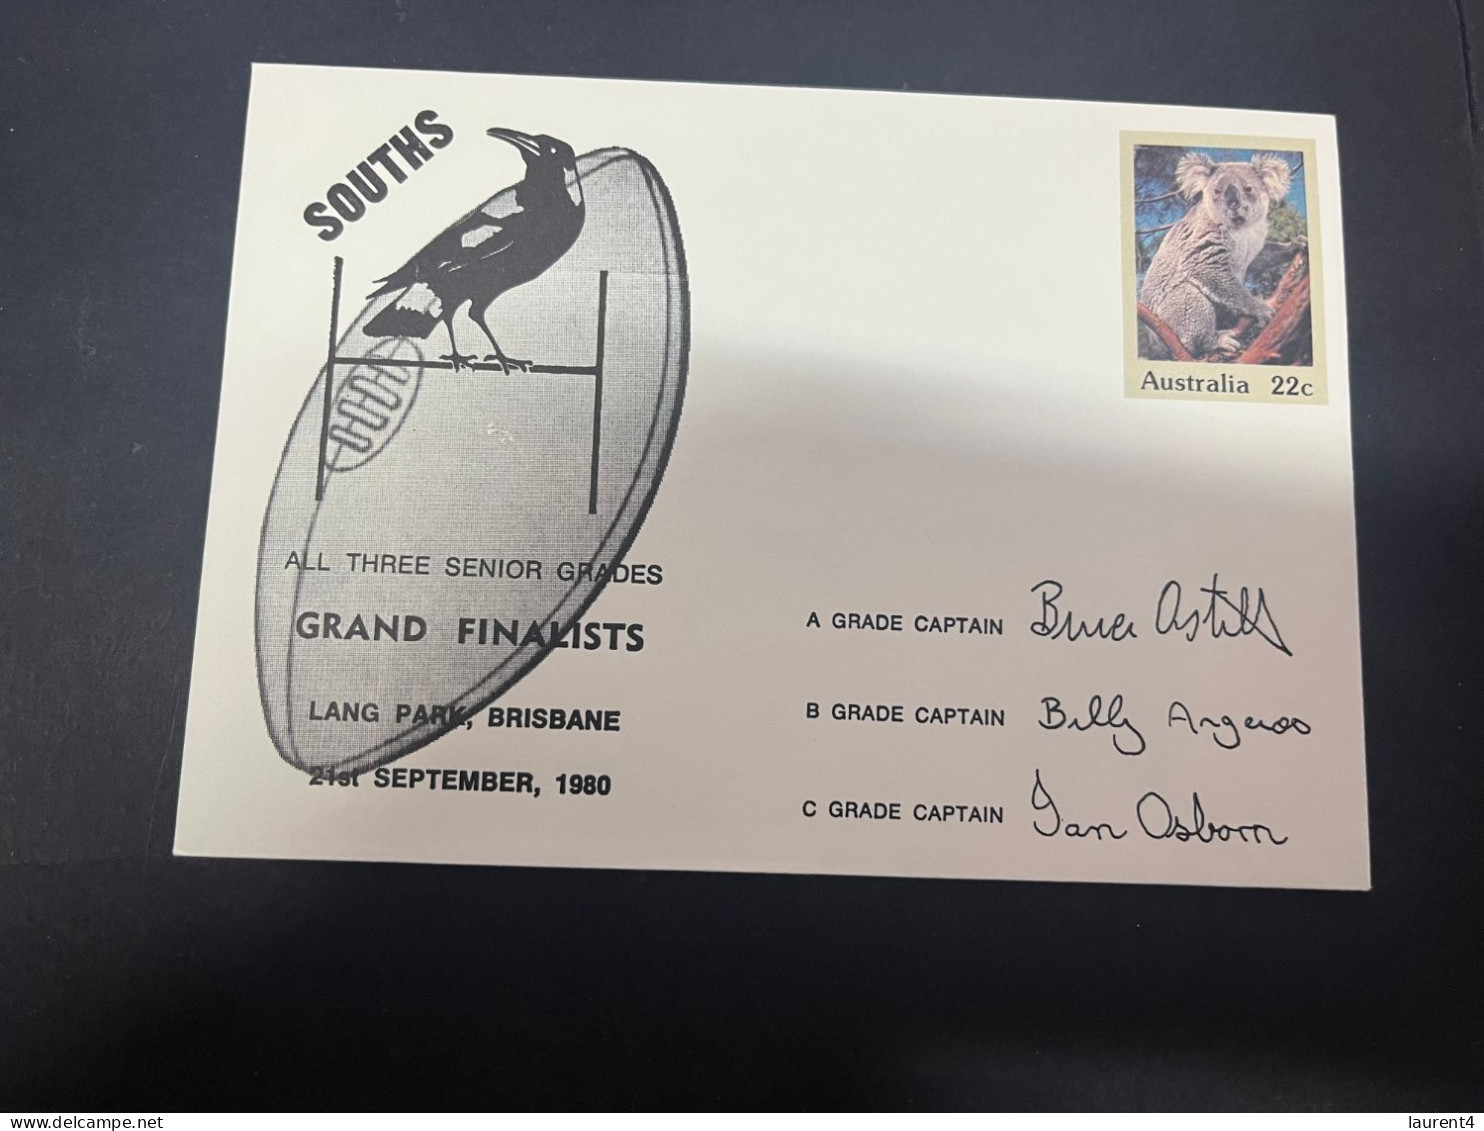 1-5-2023 (3 Z 39) Australia FDC (1 Covers) 1980 - OZ Football - South (magpies) Grand Finalists (signed - Koala) - FDC